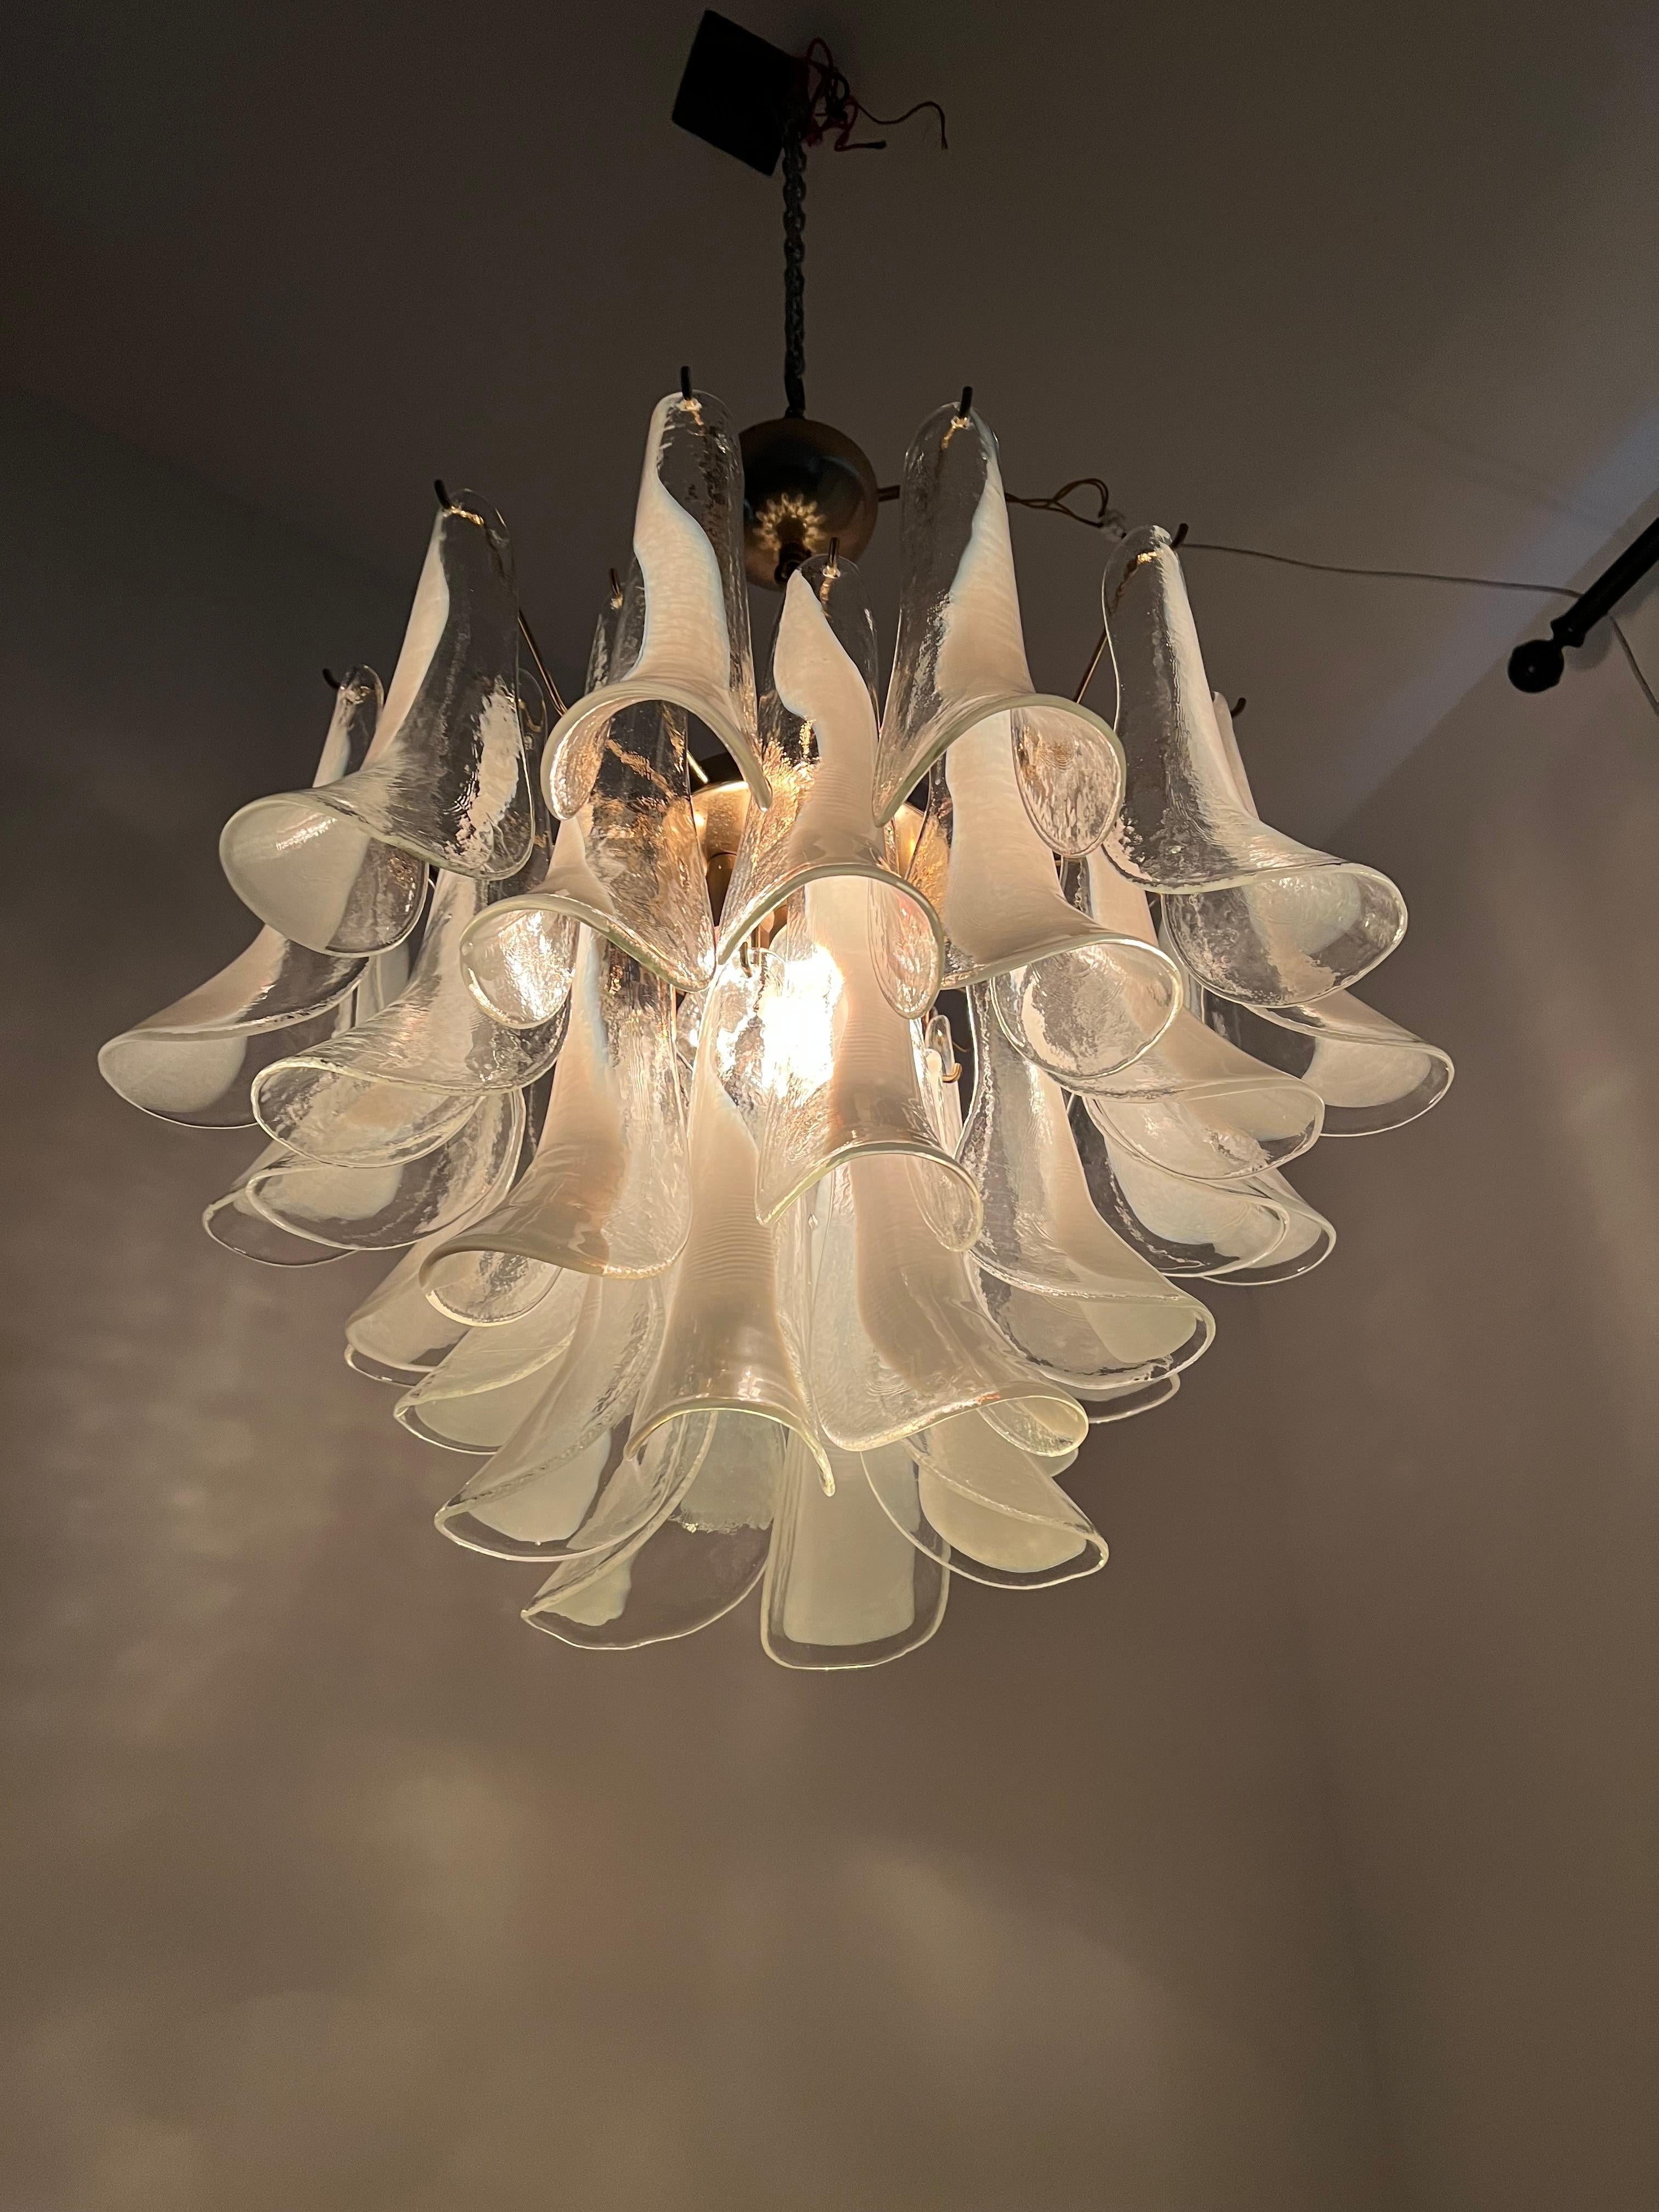 Two Identical Signed Mid-Century Modern Chandeliers, La Murrina in Murano Glass For Sale 4